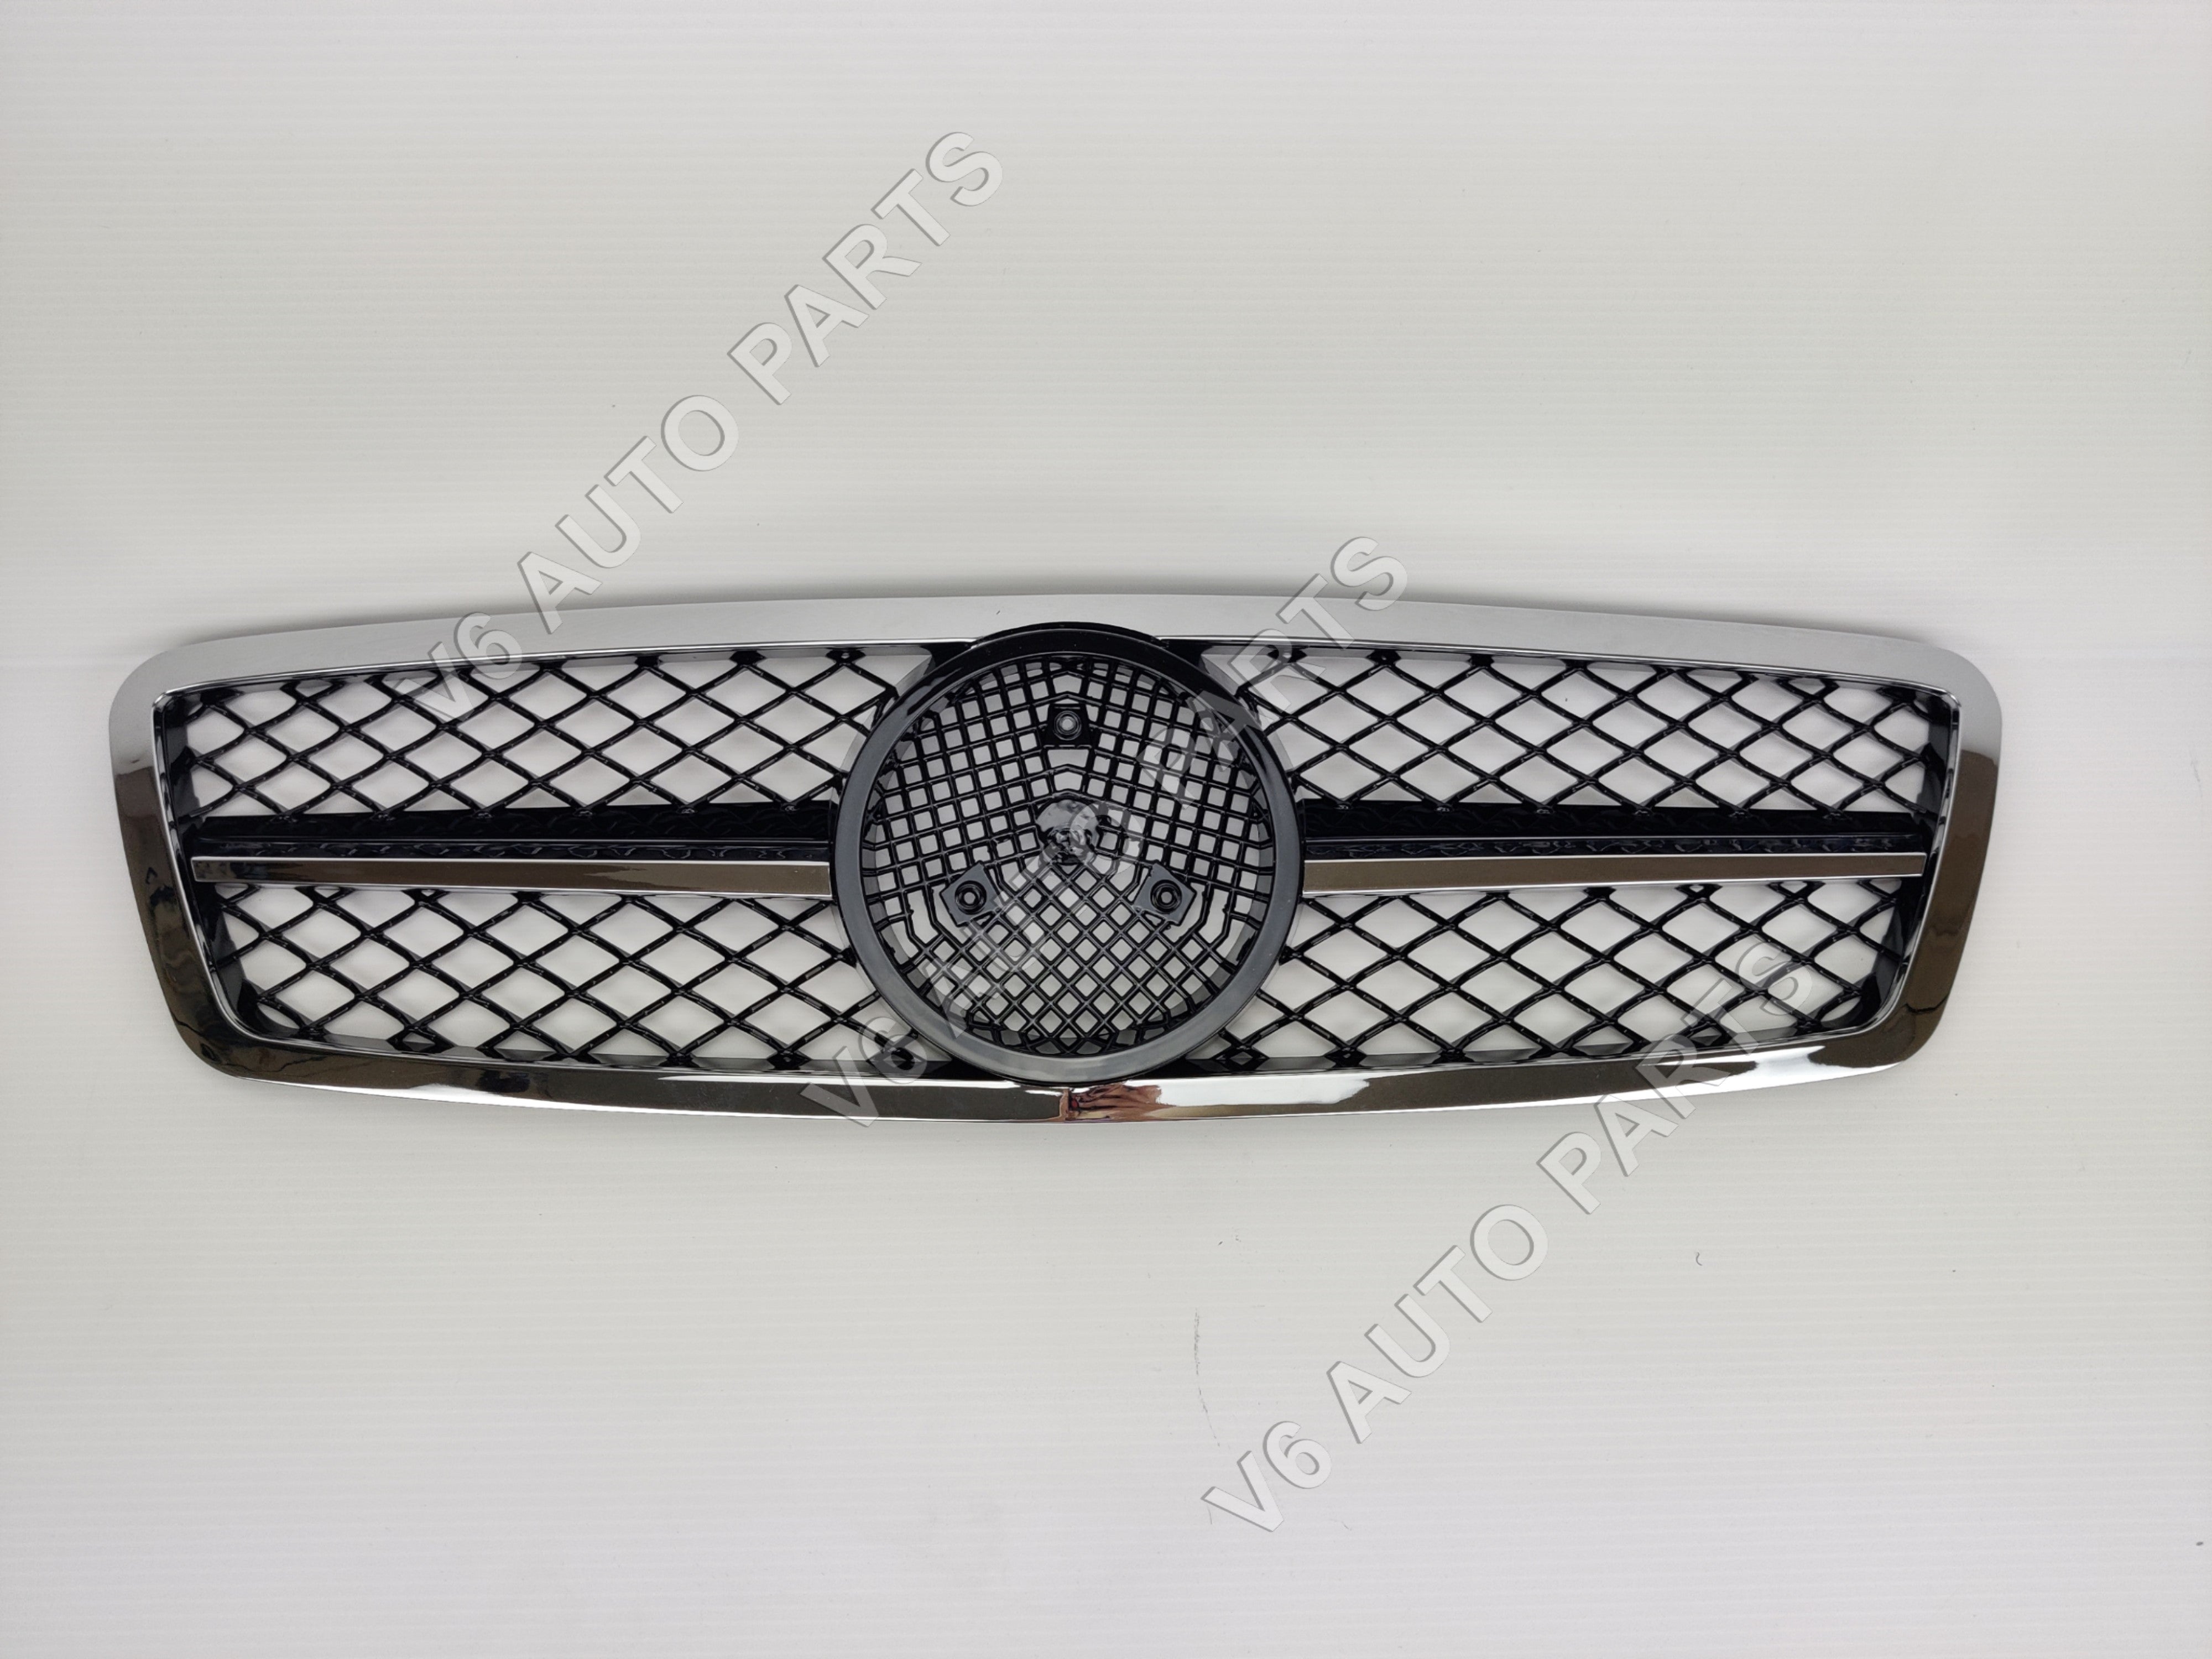 Front Radiator Grille for Mercedes C-Class 2000-2007 W203 C230 C240 C320 Saloon